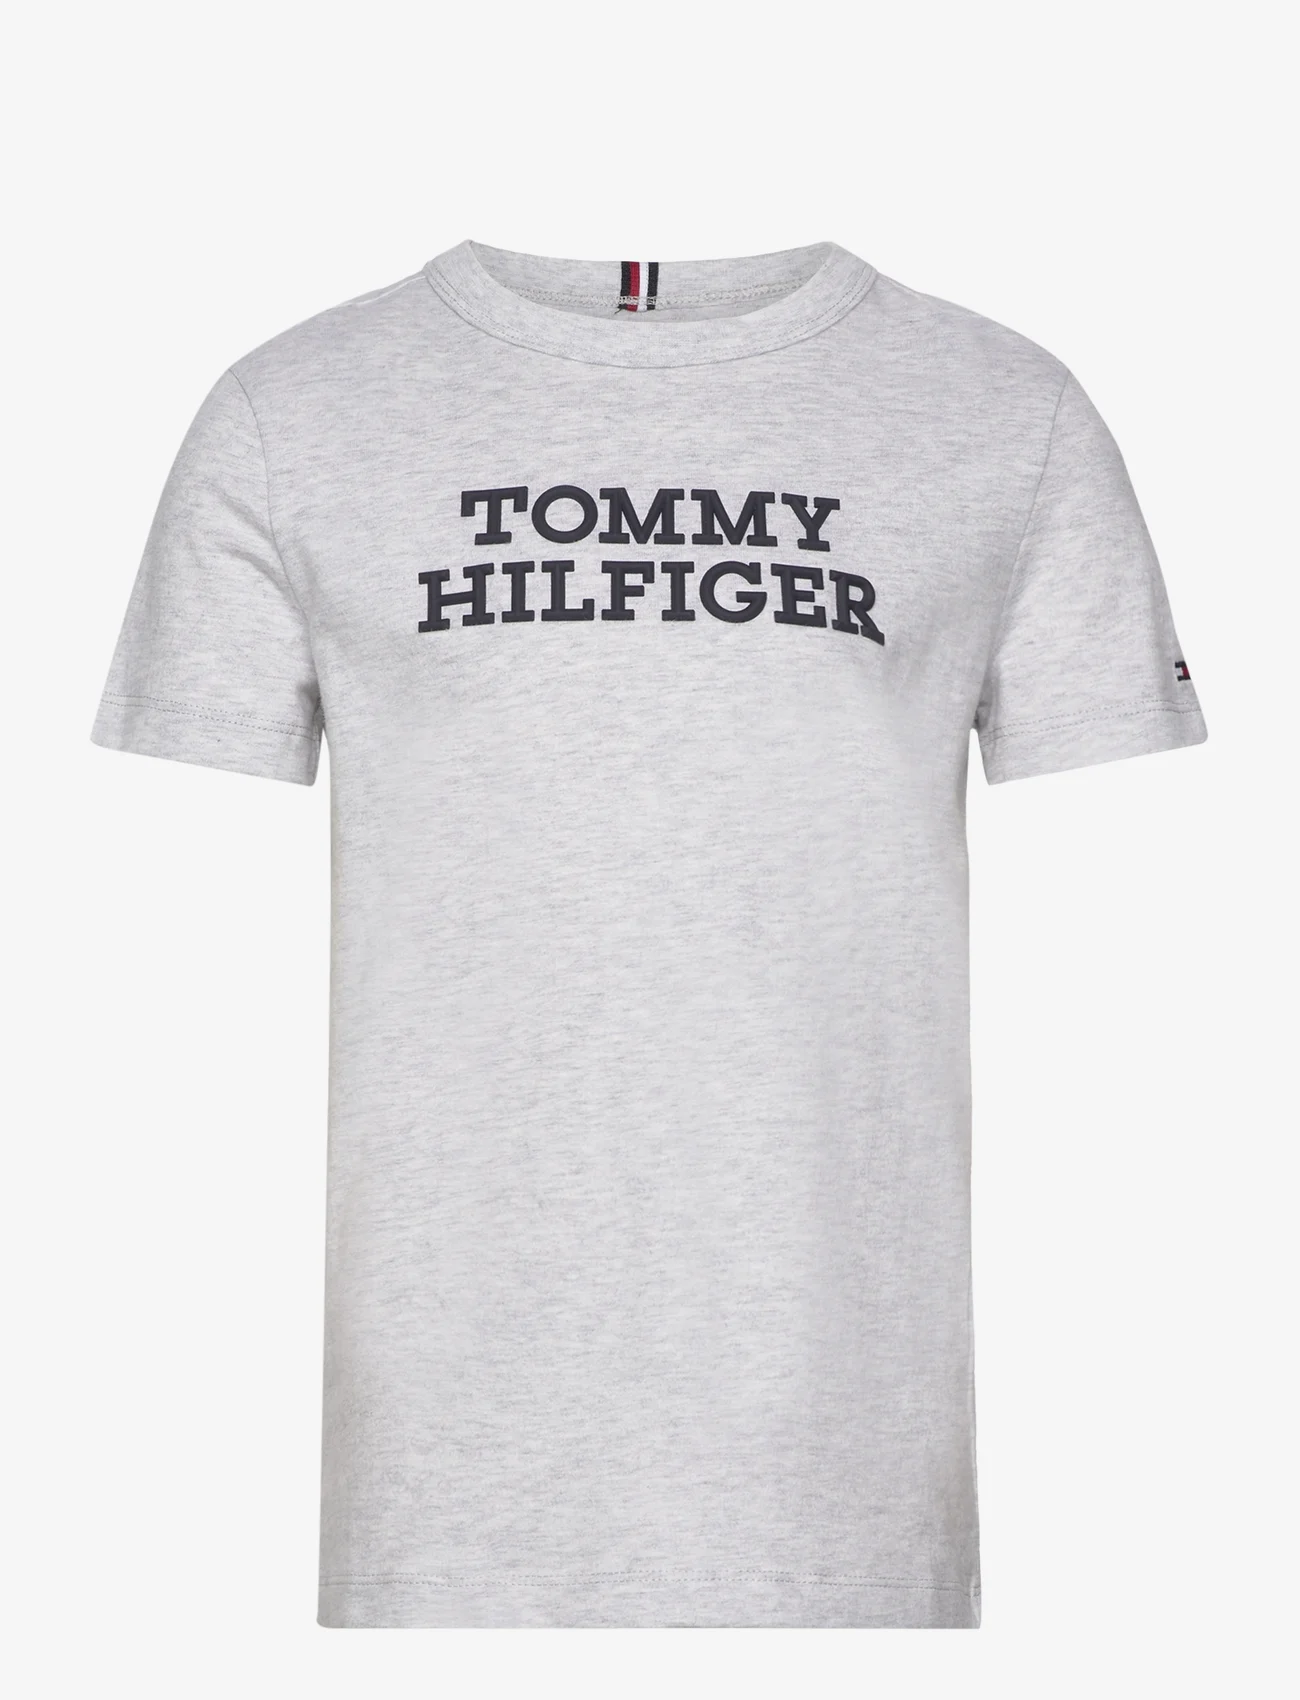 Tommy Hilfiger - TOMMY HILFIGER LOGO TEE S/S - short-sleeved t-shirts - new light grey heather - 0